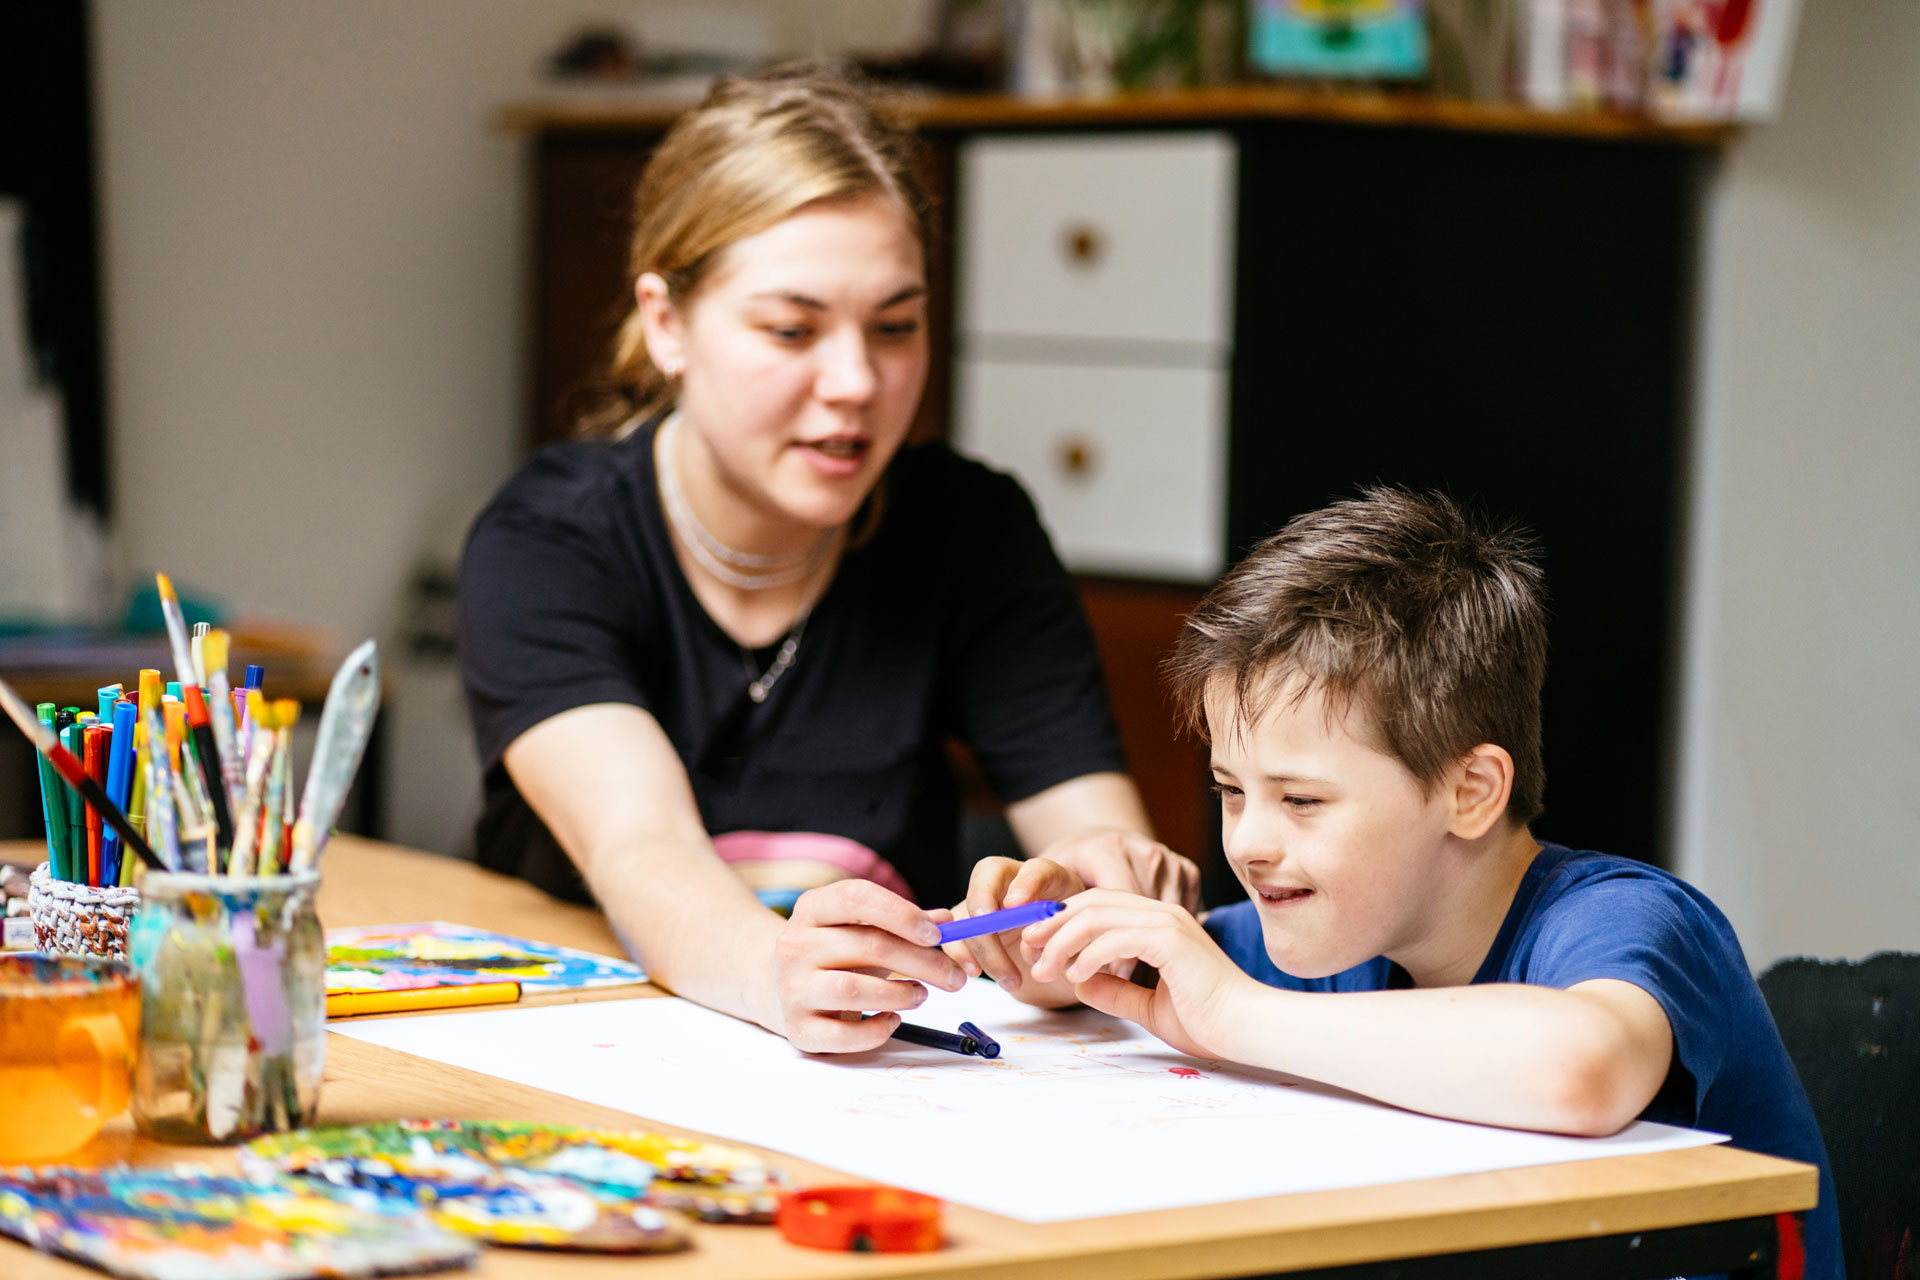 A female teacher works with a student with down syndrome.